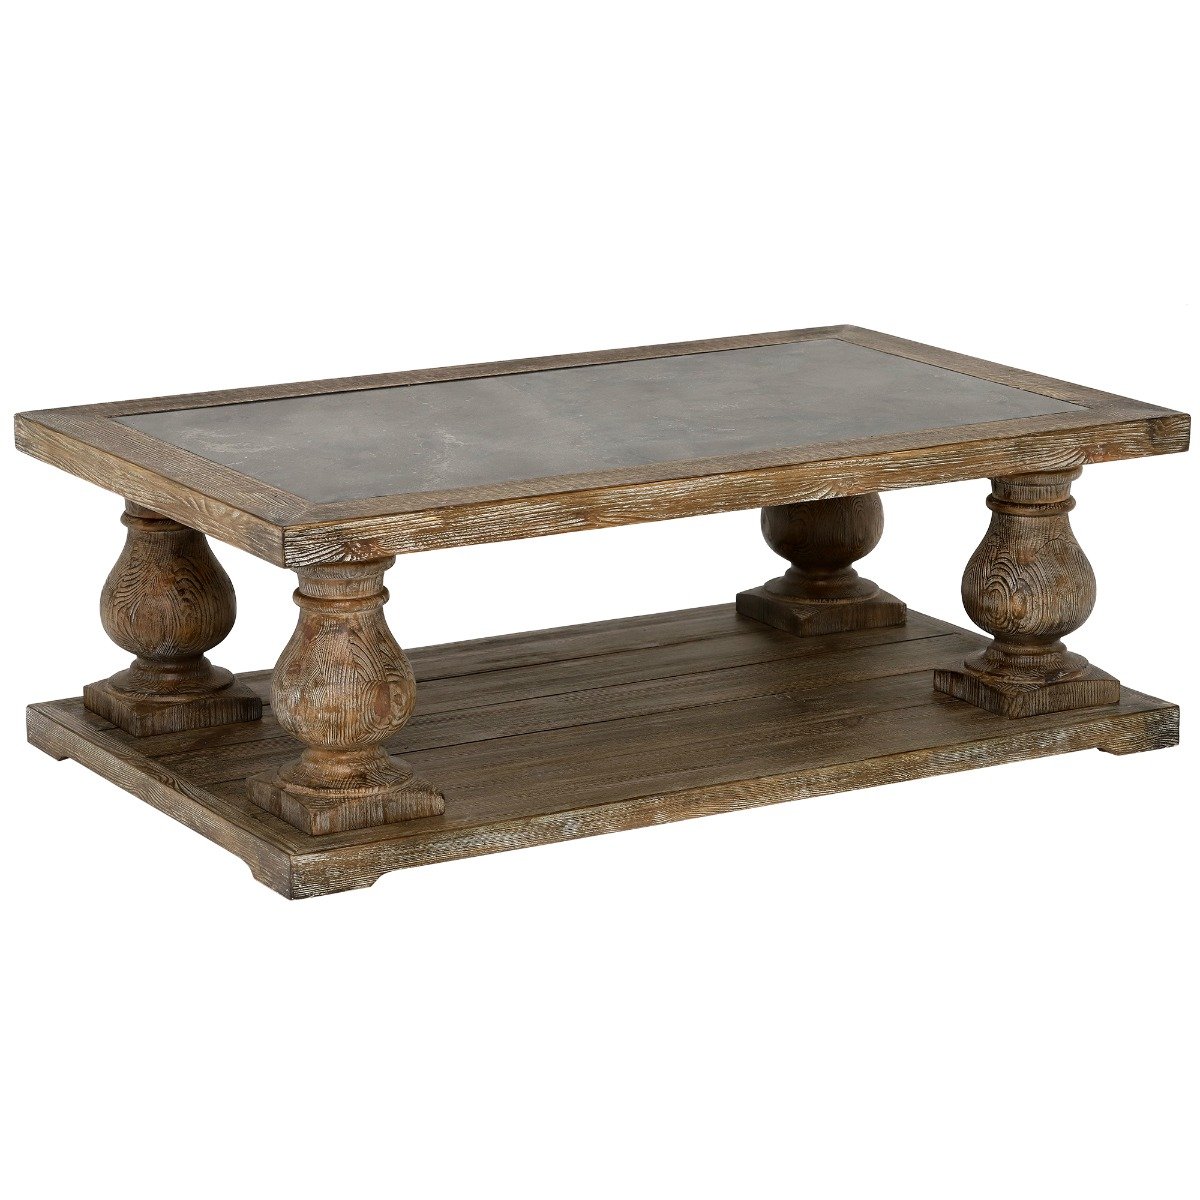 Woolton Coffee Table, Brown Stone | Barker & Stonehouse